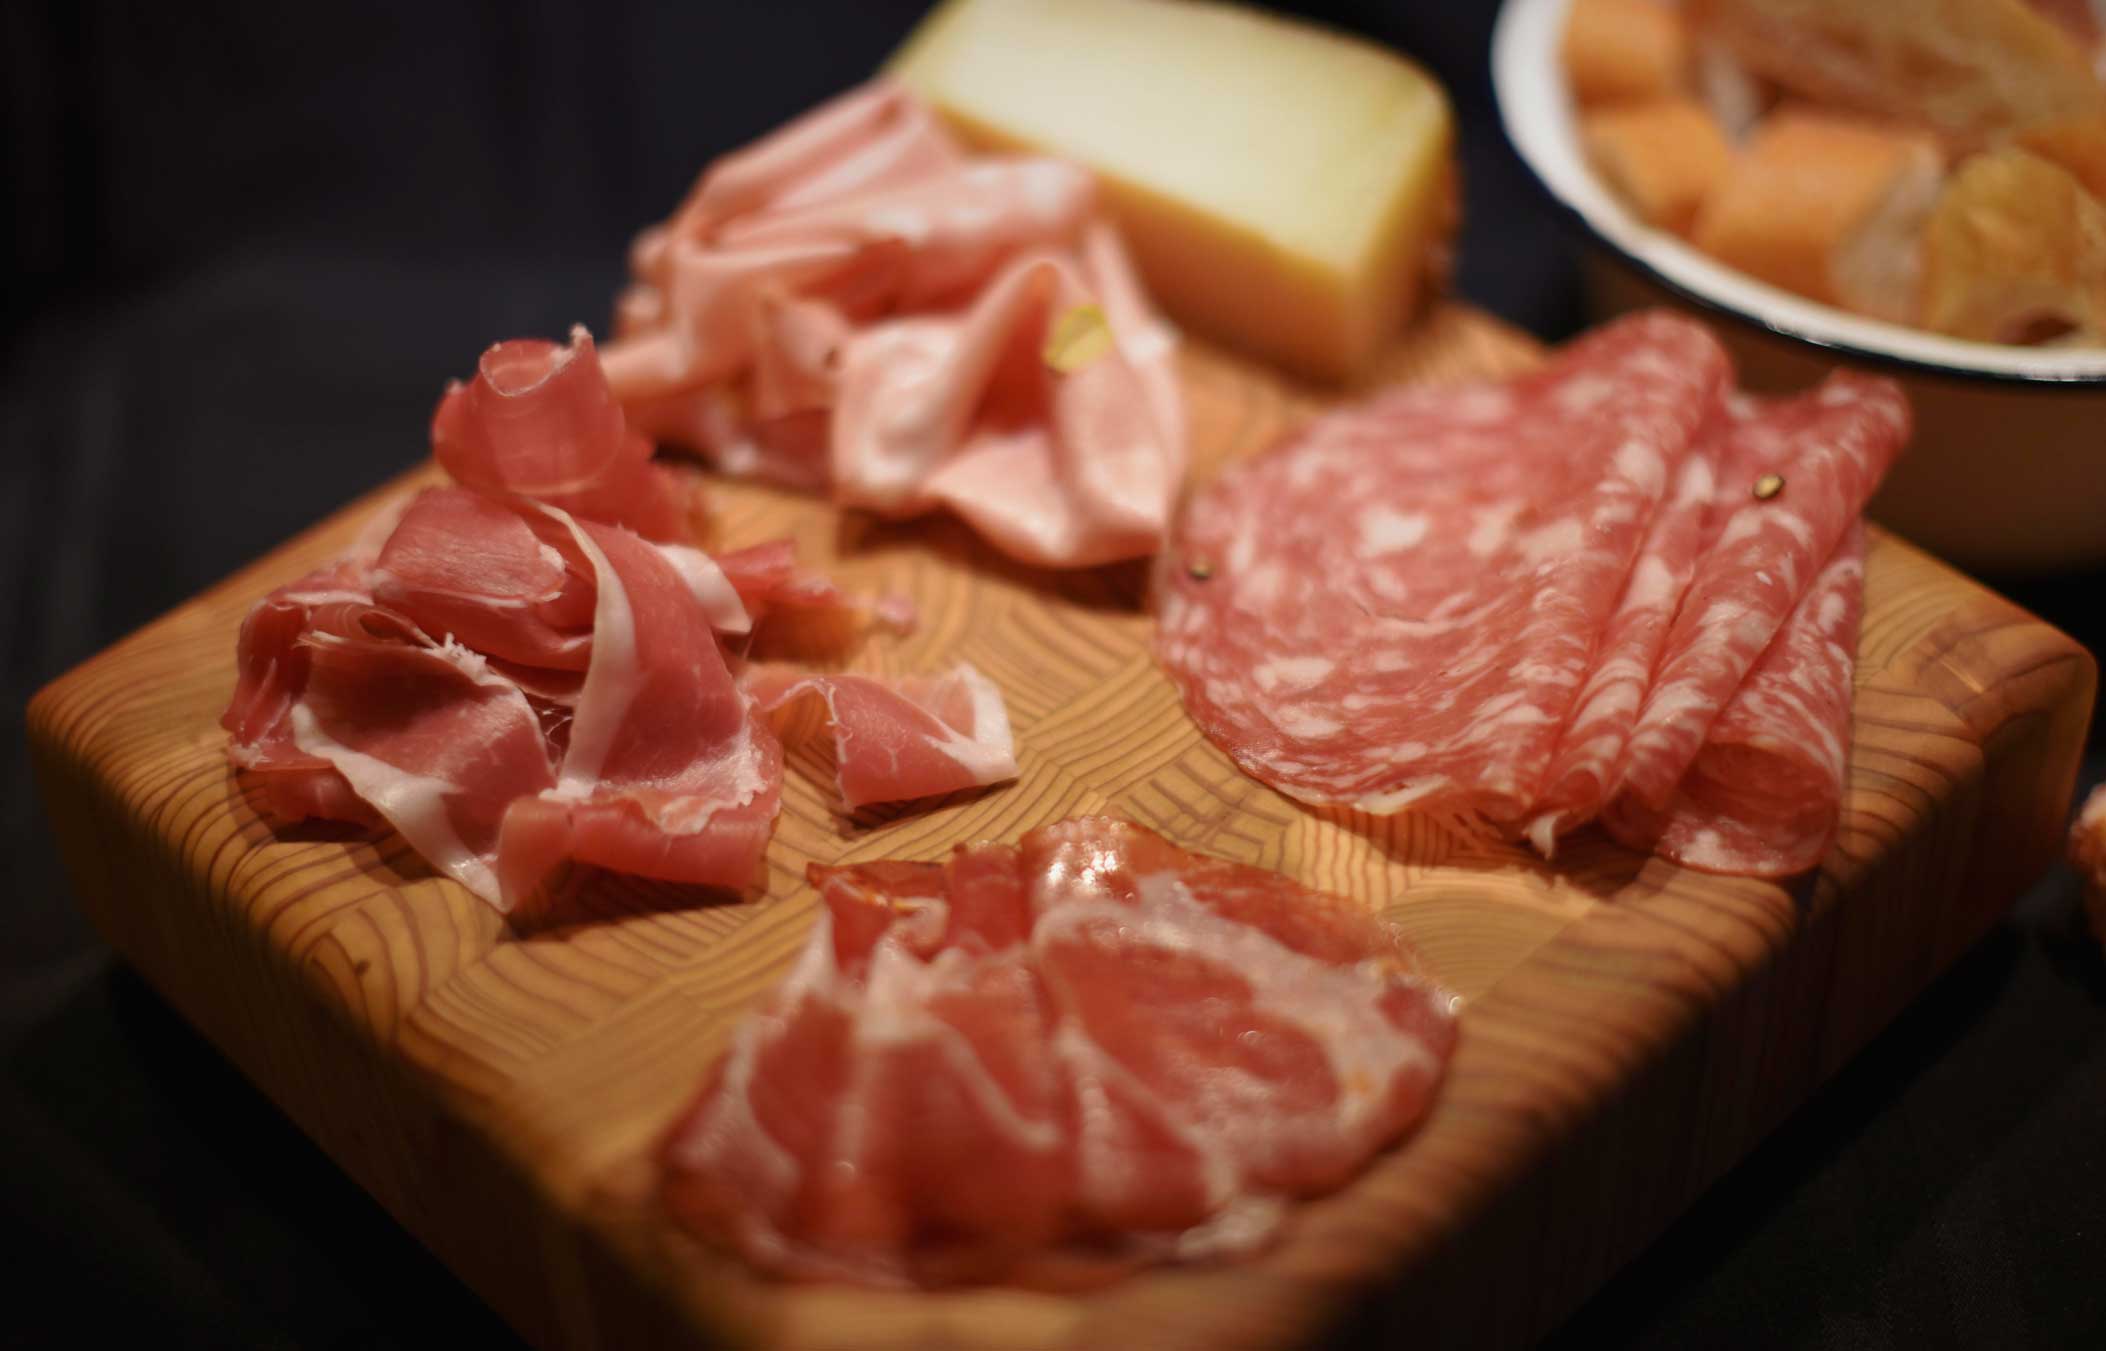 Create a plate of charcuterie c/o Lucca